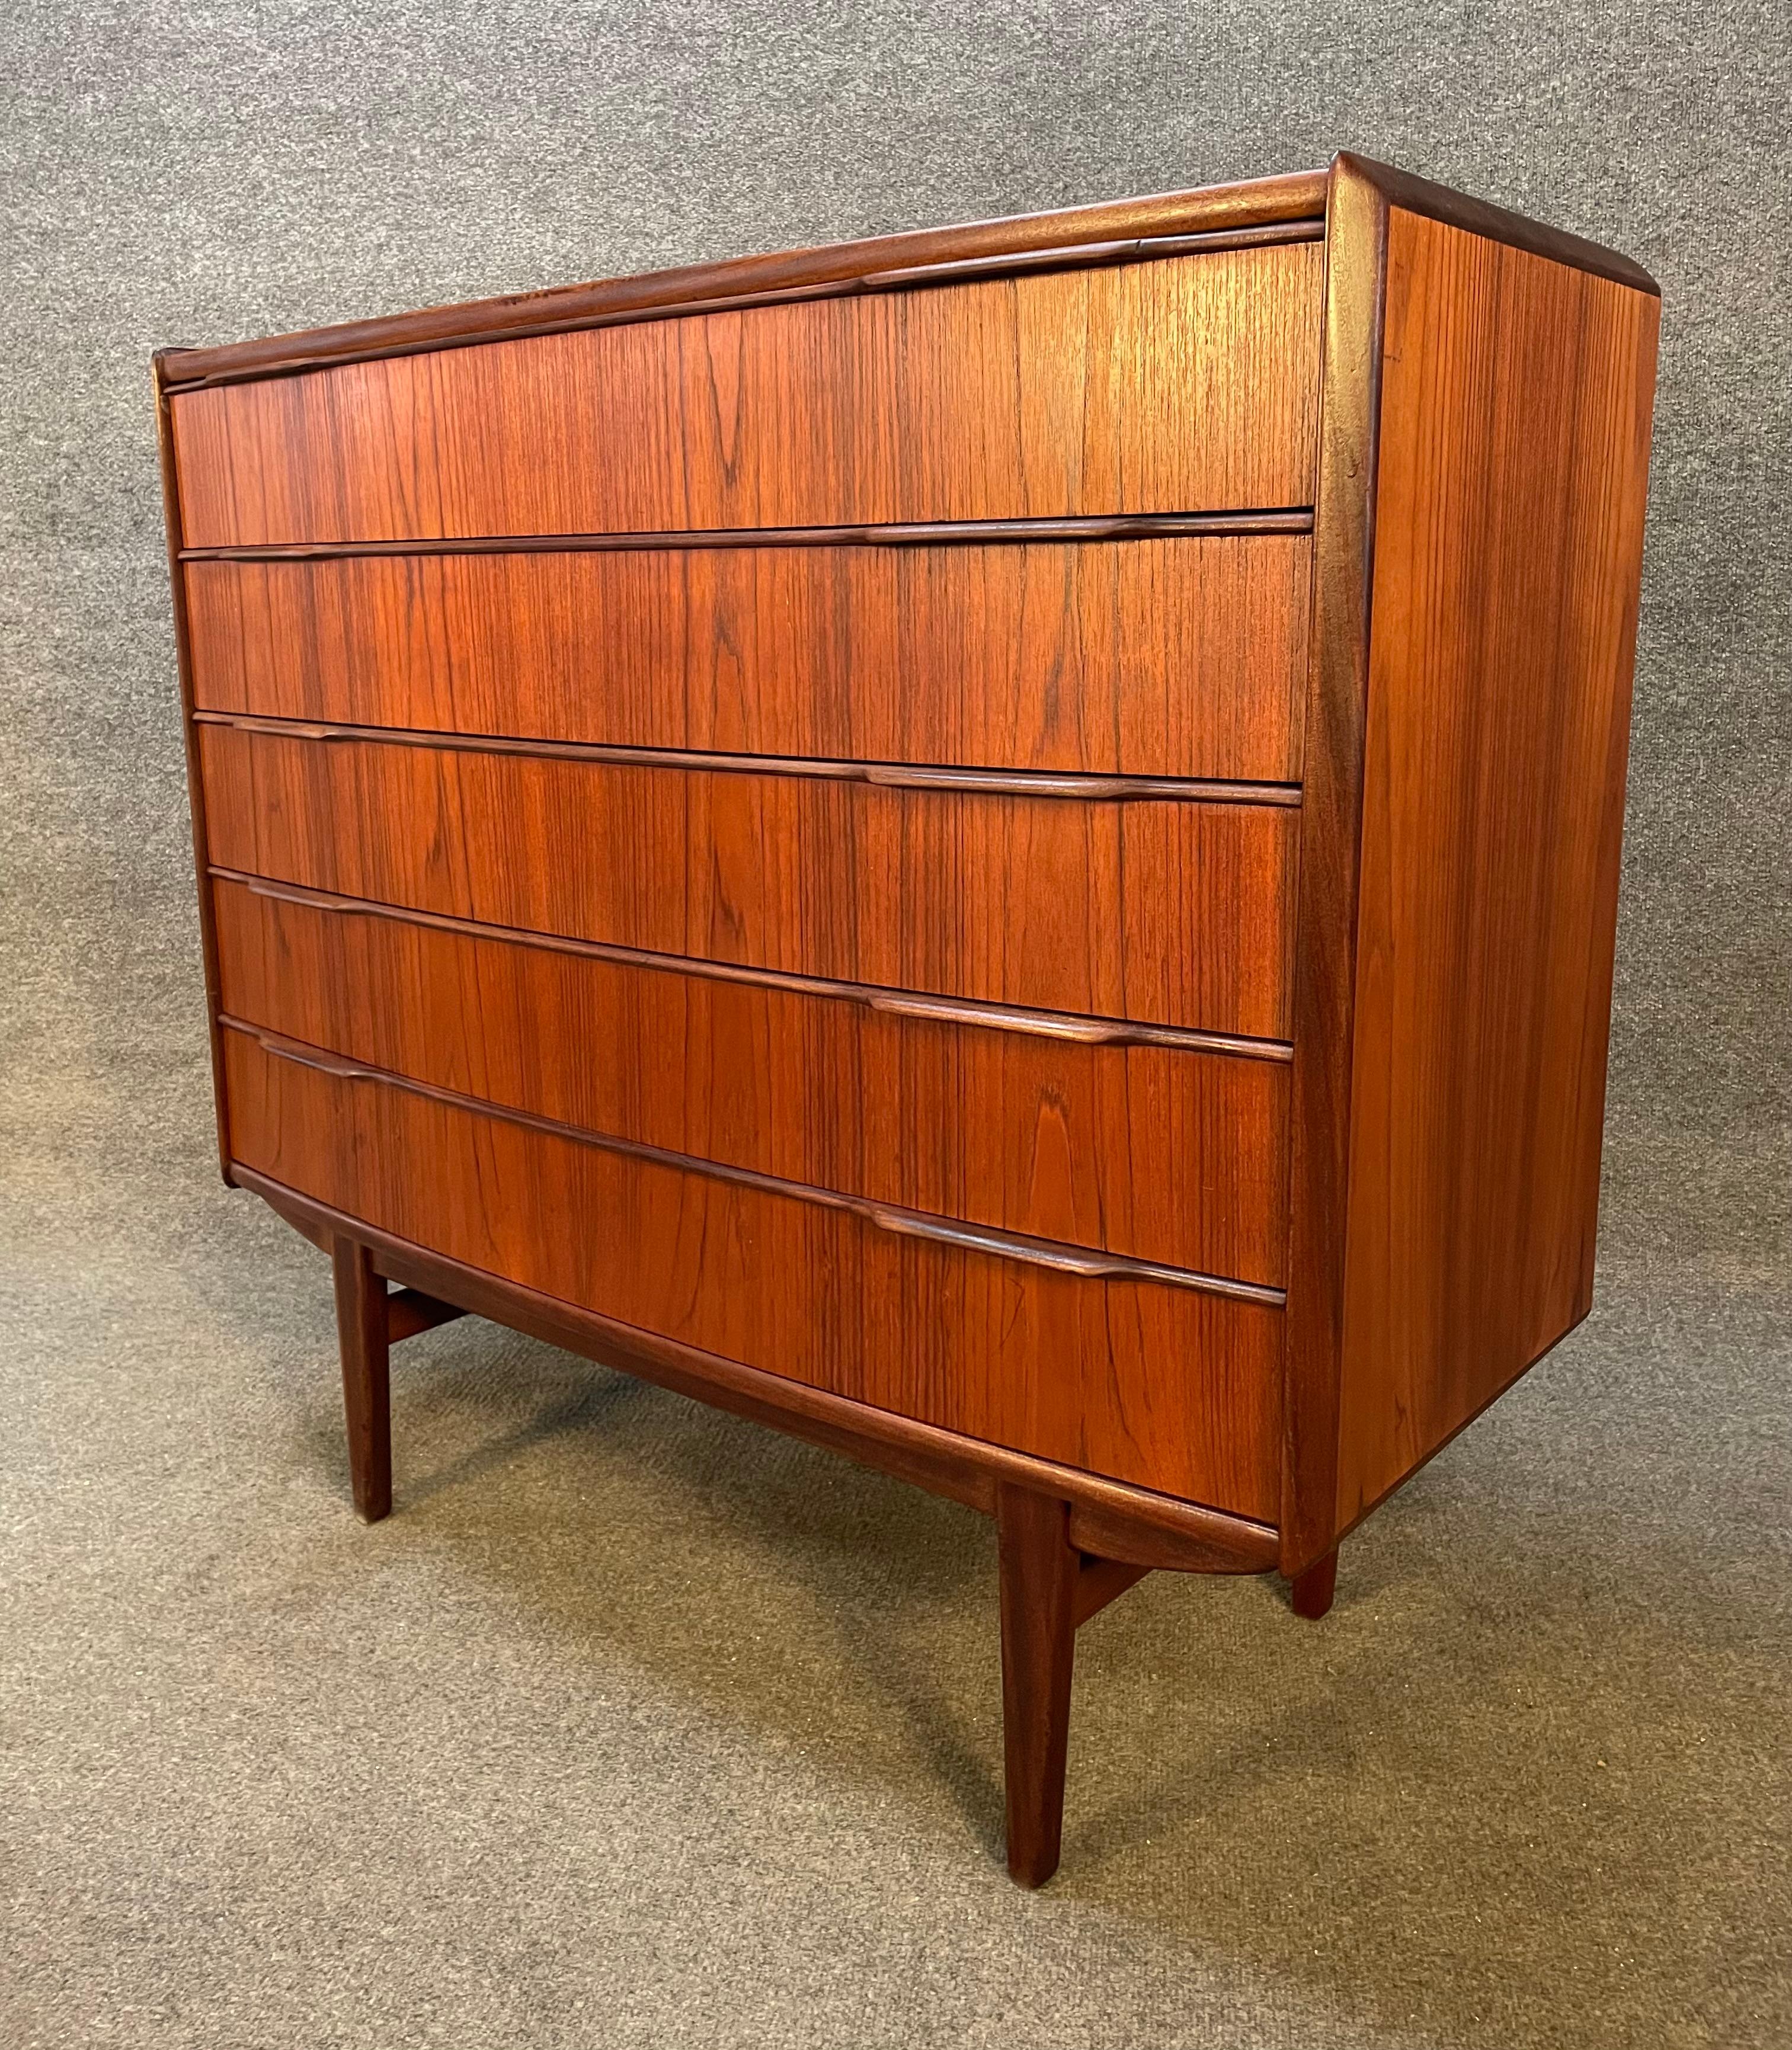 Here is a beautiful Scandinavian modern low boy dresser in teak wood manufactured in Denmark in the 1960's.
This exquisite piece, recently imported from Europe to California before its refinishing, features a vibrant wood grain, five bowed front